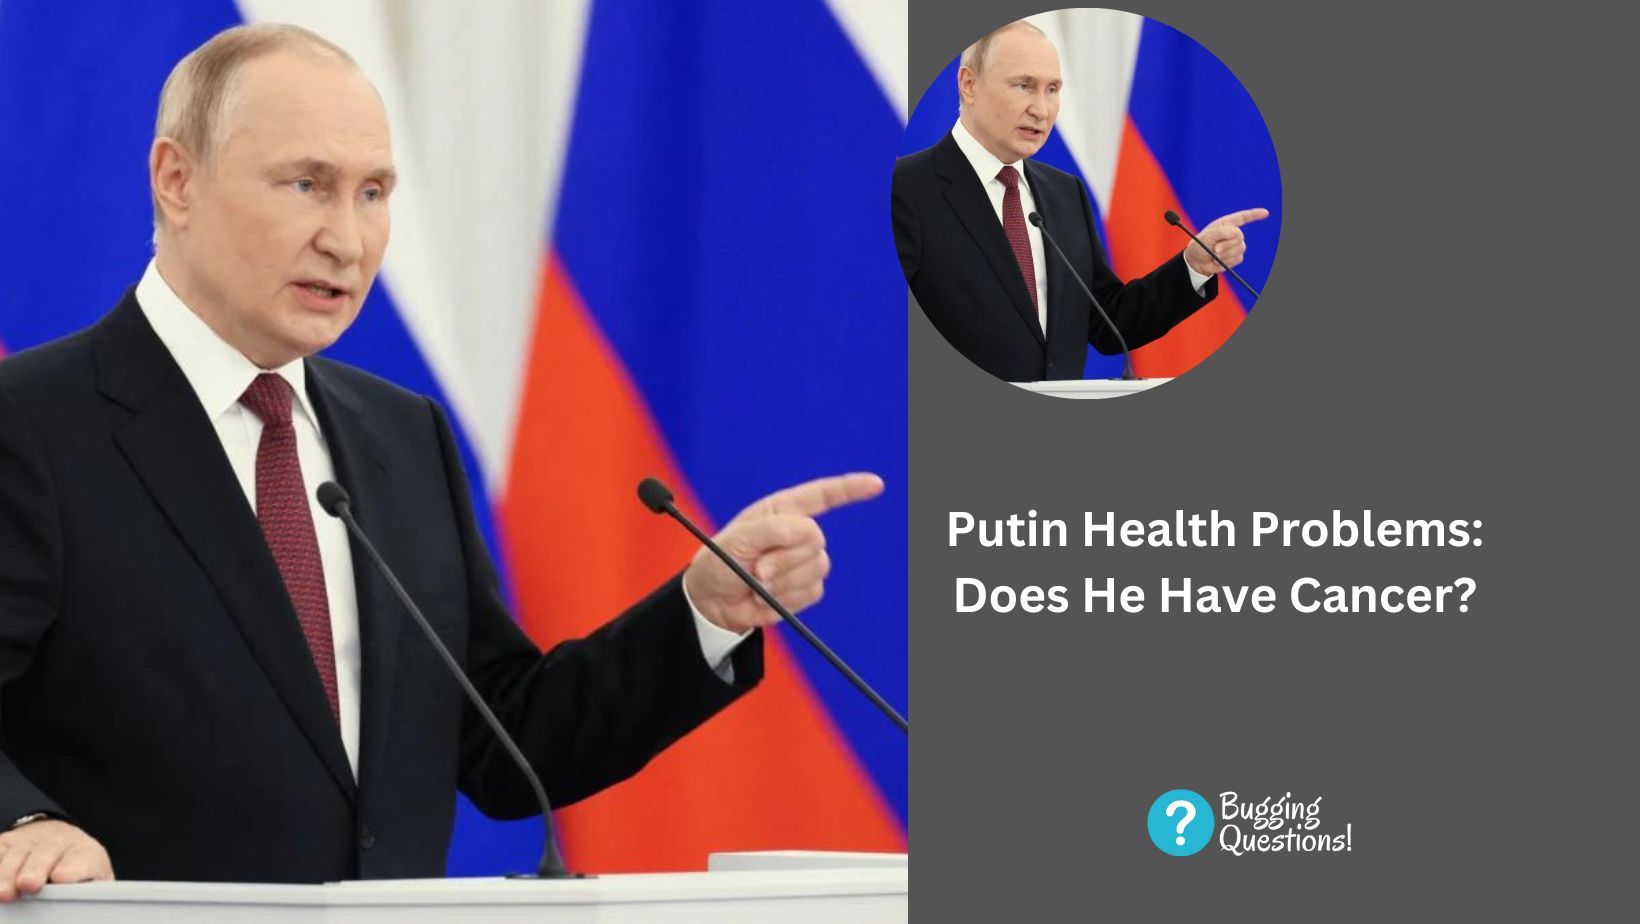 Putin Health Problems: Does He Have Cancer?